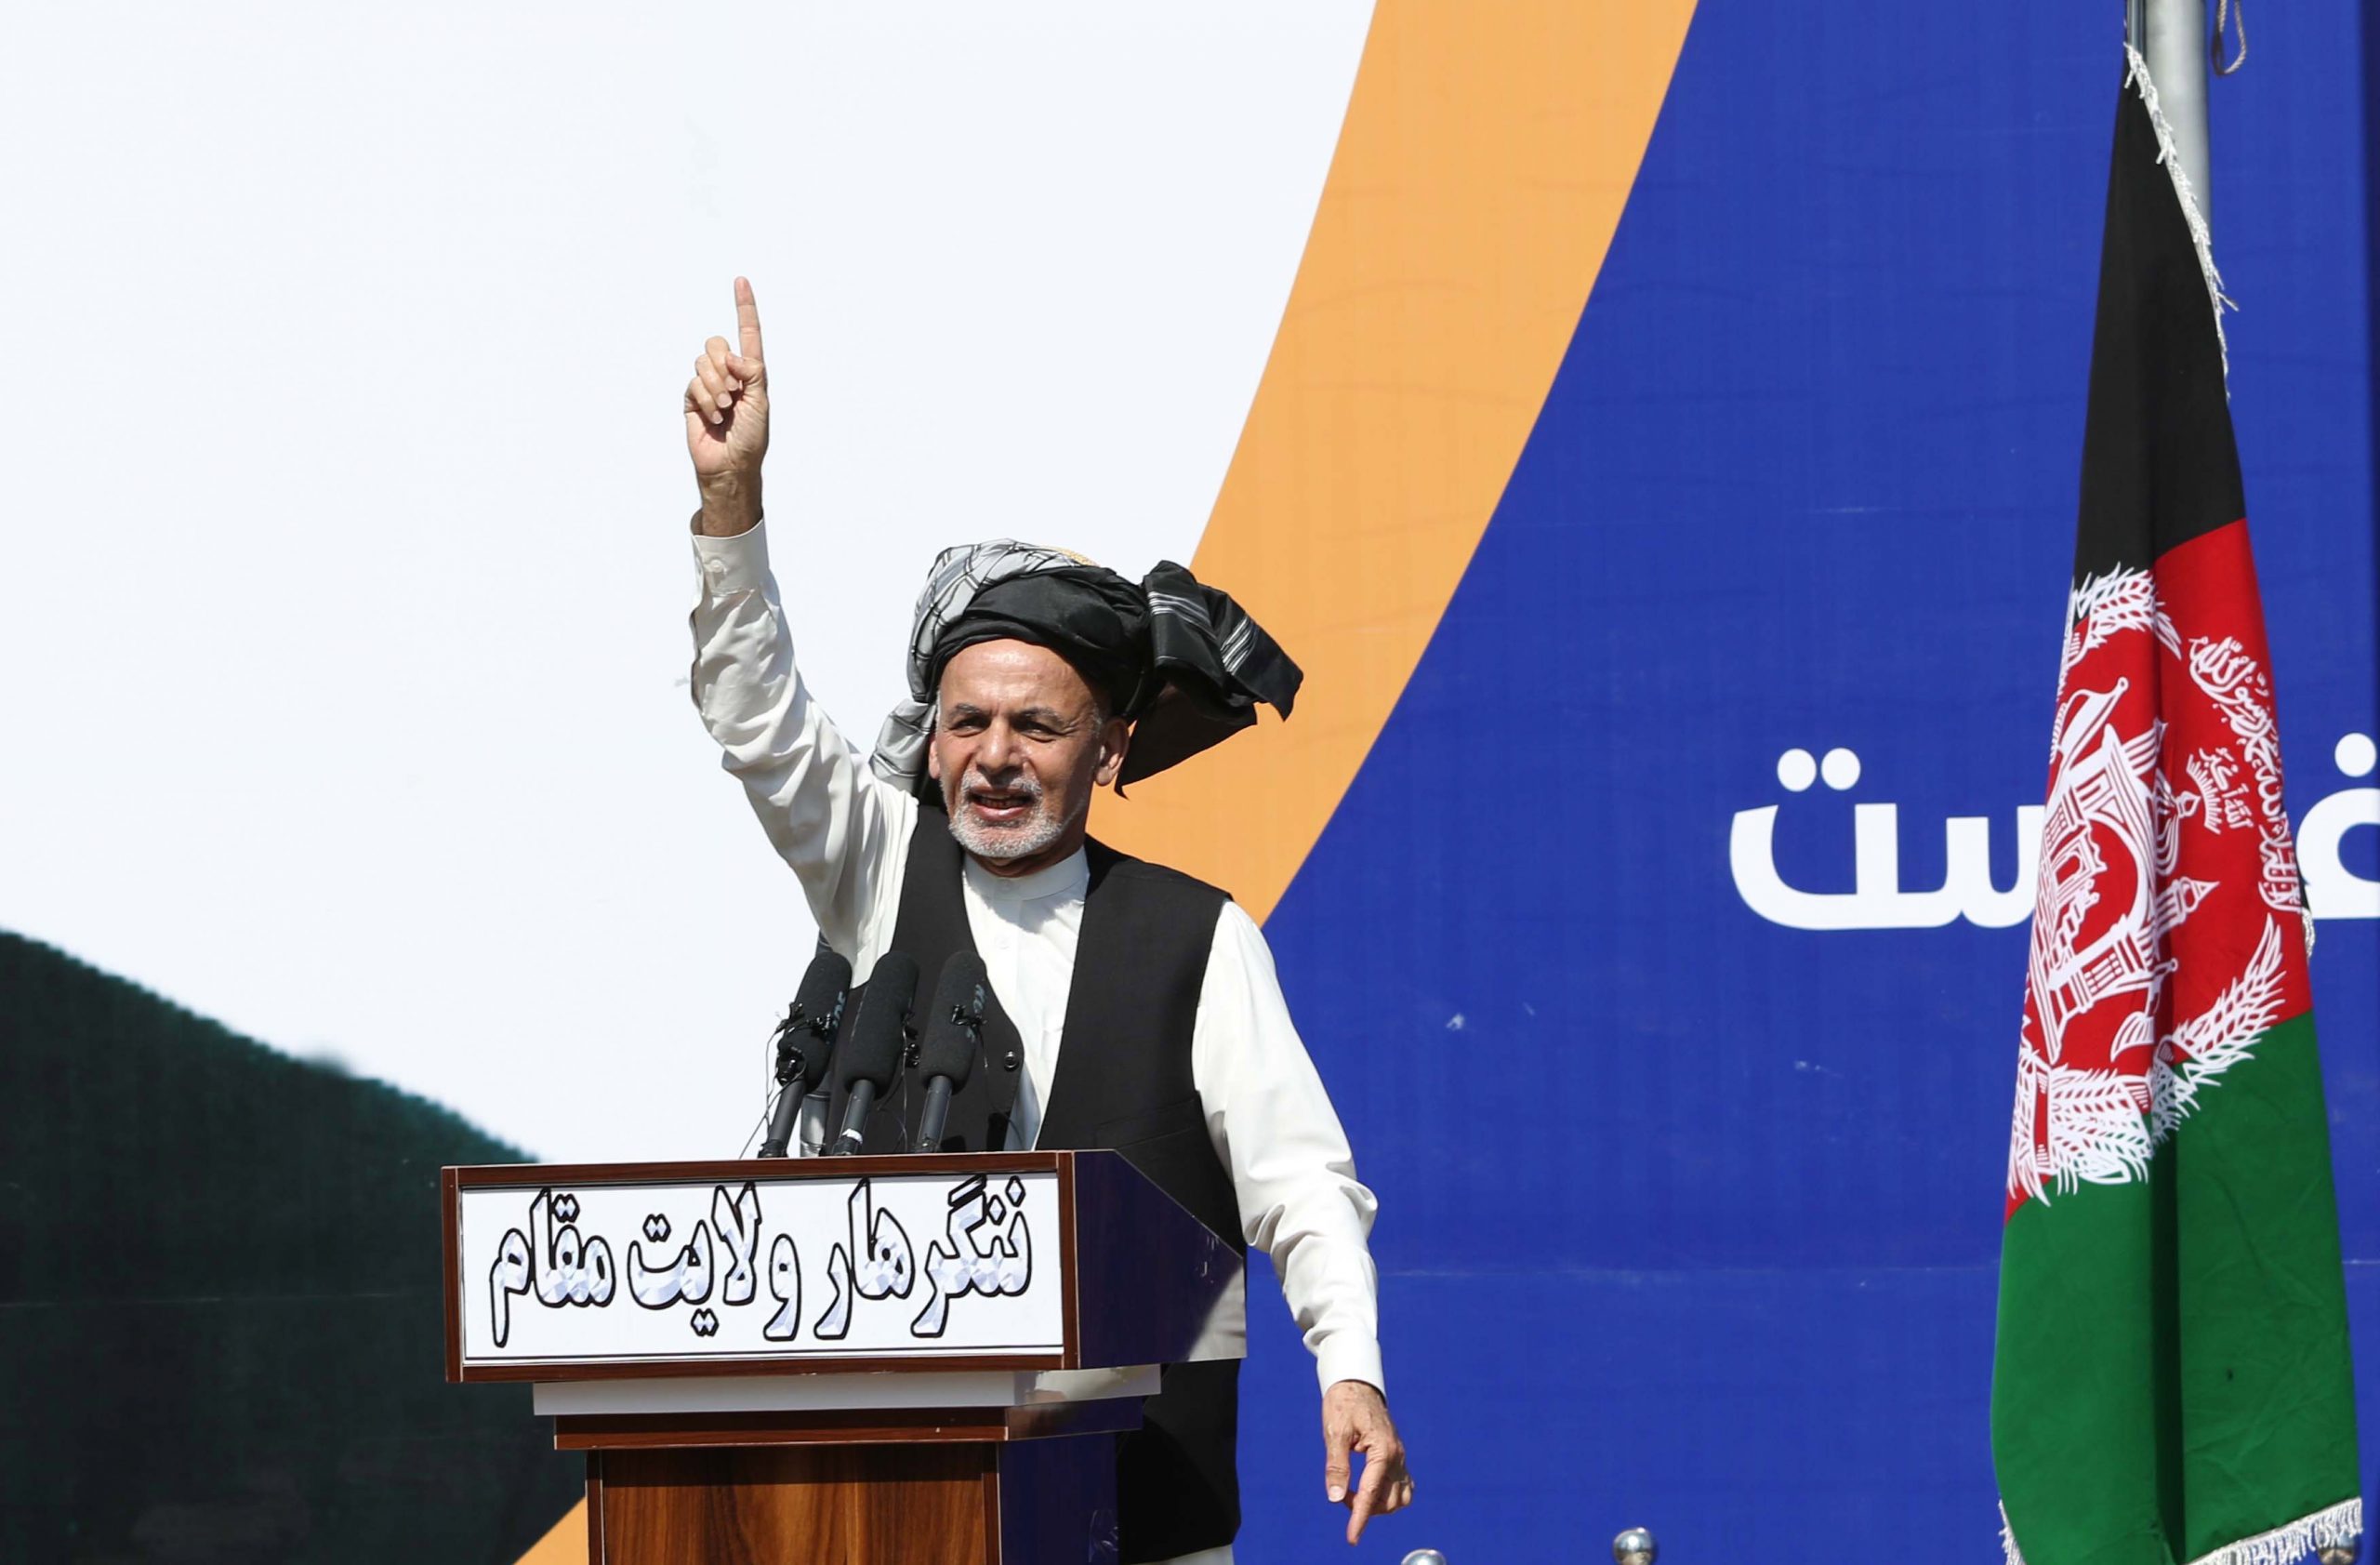 epa08266359 Afghan President Ashraf Ghani speaks to supporters in Jalalabad, Afghanistan, 03 March 2020. Reports state Ghani says his government has not pledged to free Taliban prisoners, as declared in an agreement reached by the US and Taliban officials. The agreement included cease-fire, withdrawal of foreign forces, intra-Afghan negotiations and counterterrorism assurances.  EPA/GHULAMULLAH HABIBI